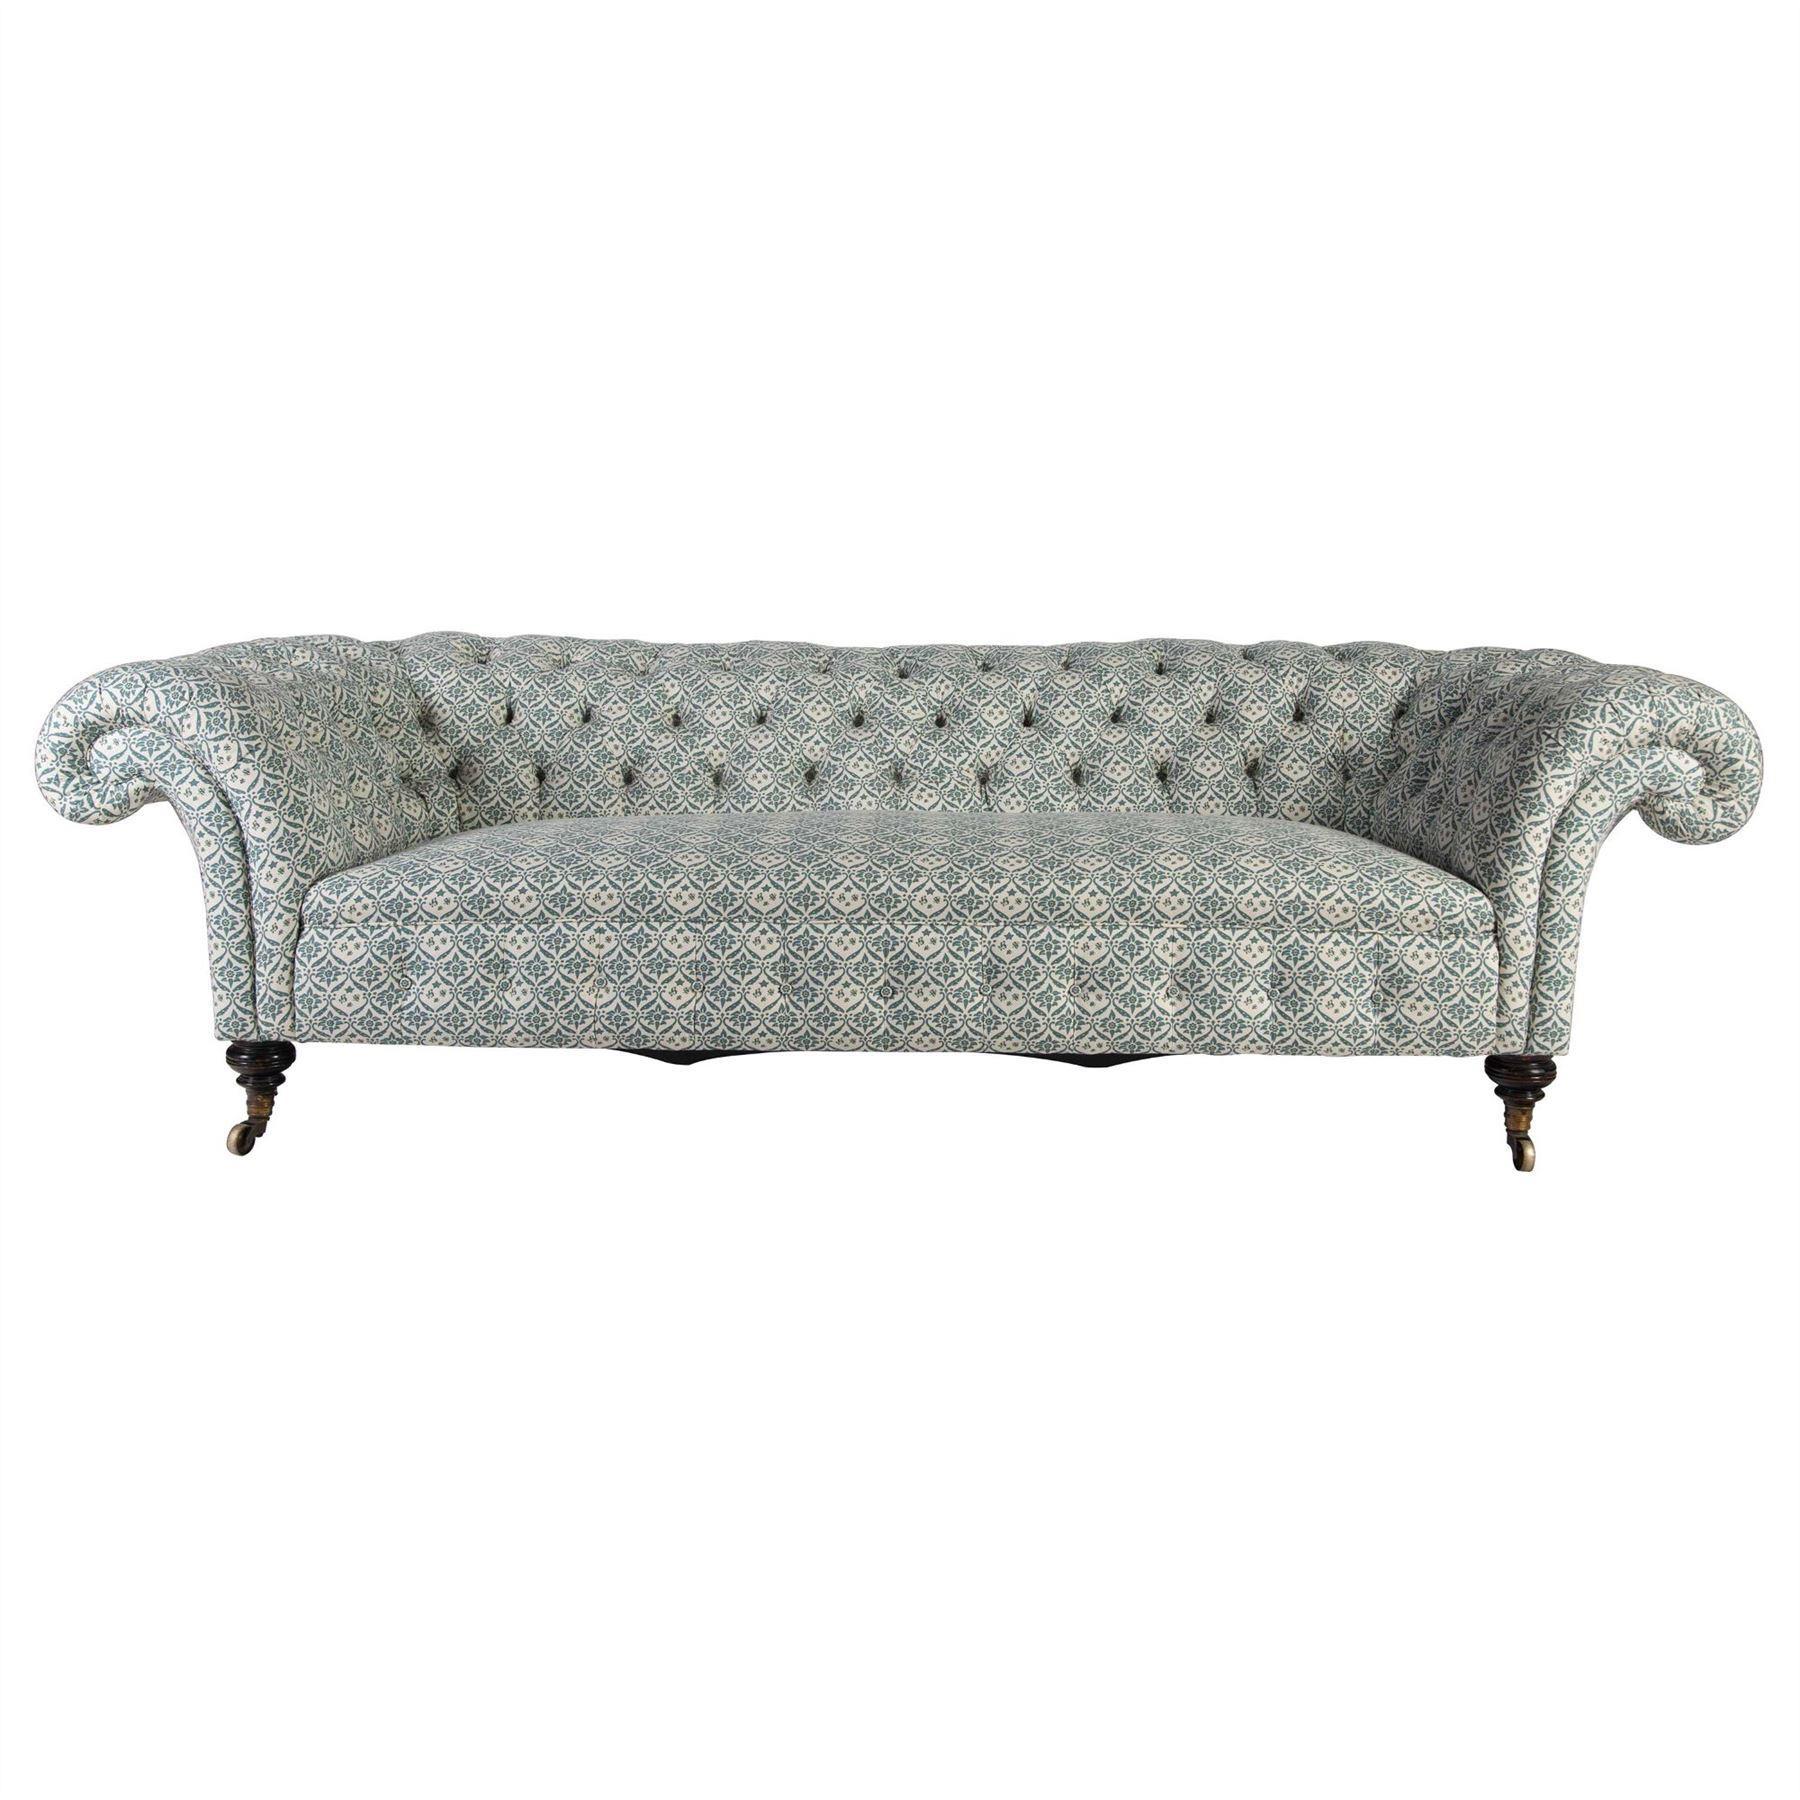 An exceptional 19th century buttoned chesterfield by Howard & Sons, circa 1880. Fully reupholstered in the traditional manner with horsehair stuffing throughout and covered in Howard & Sons ticking fabric ready for top covering fabric of your choice